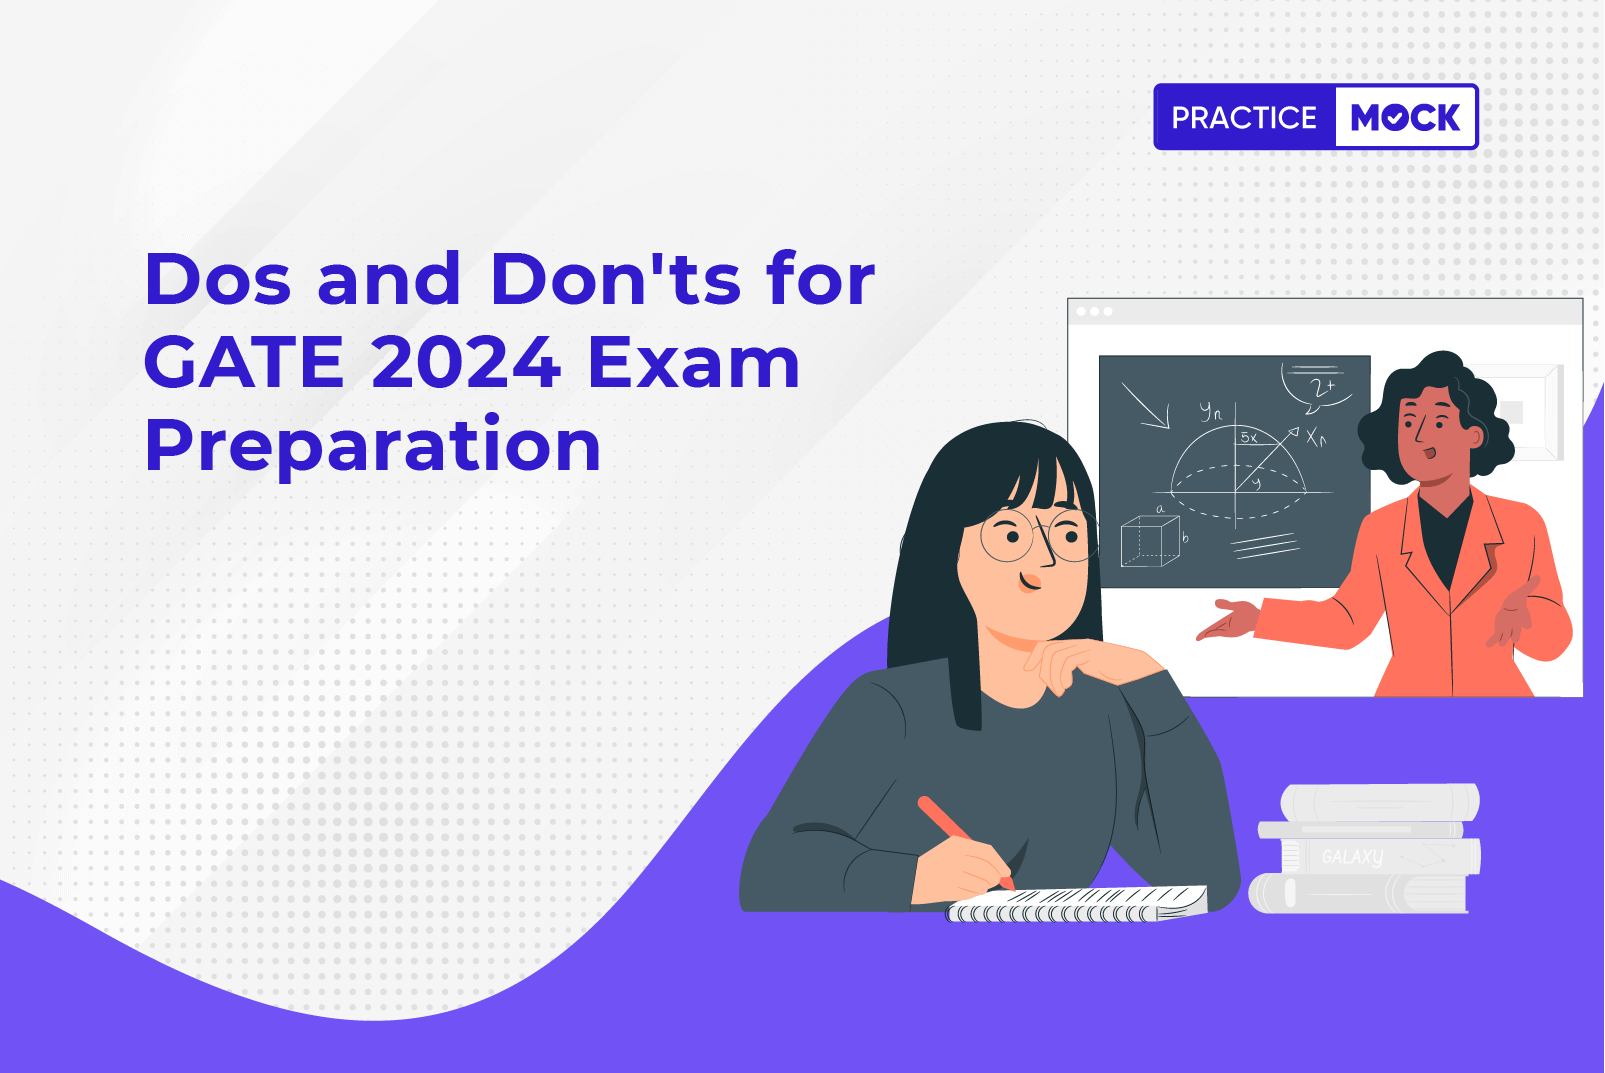 Important Dos and Don'ts for GATE 2024 Exam Preparation